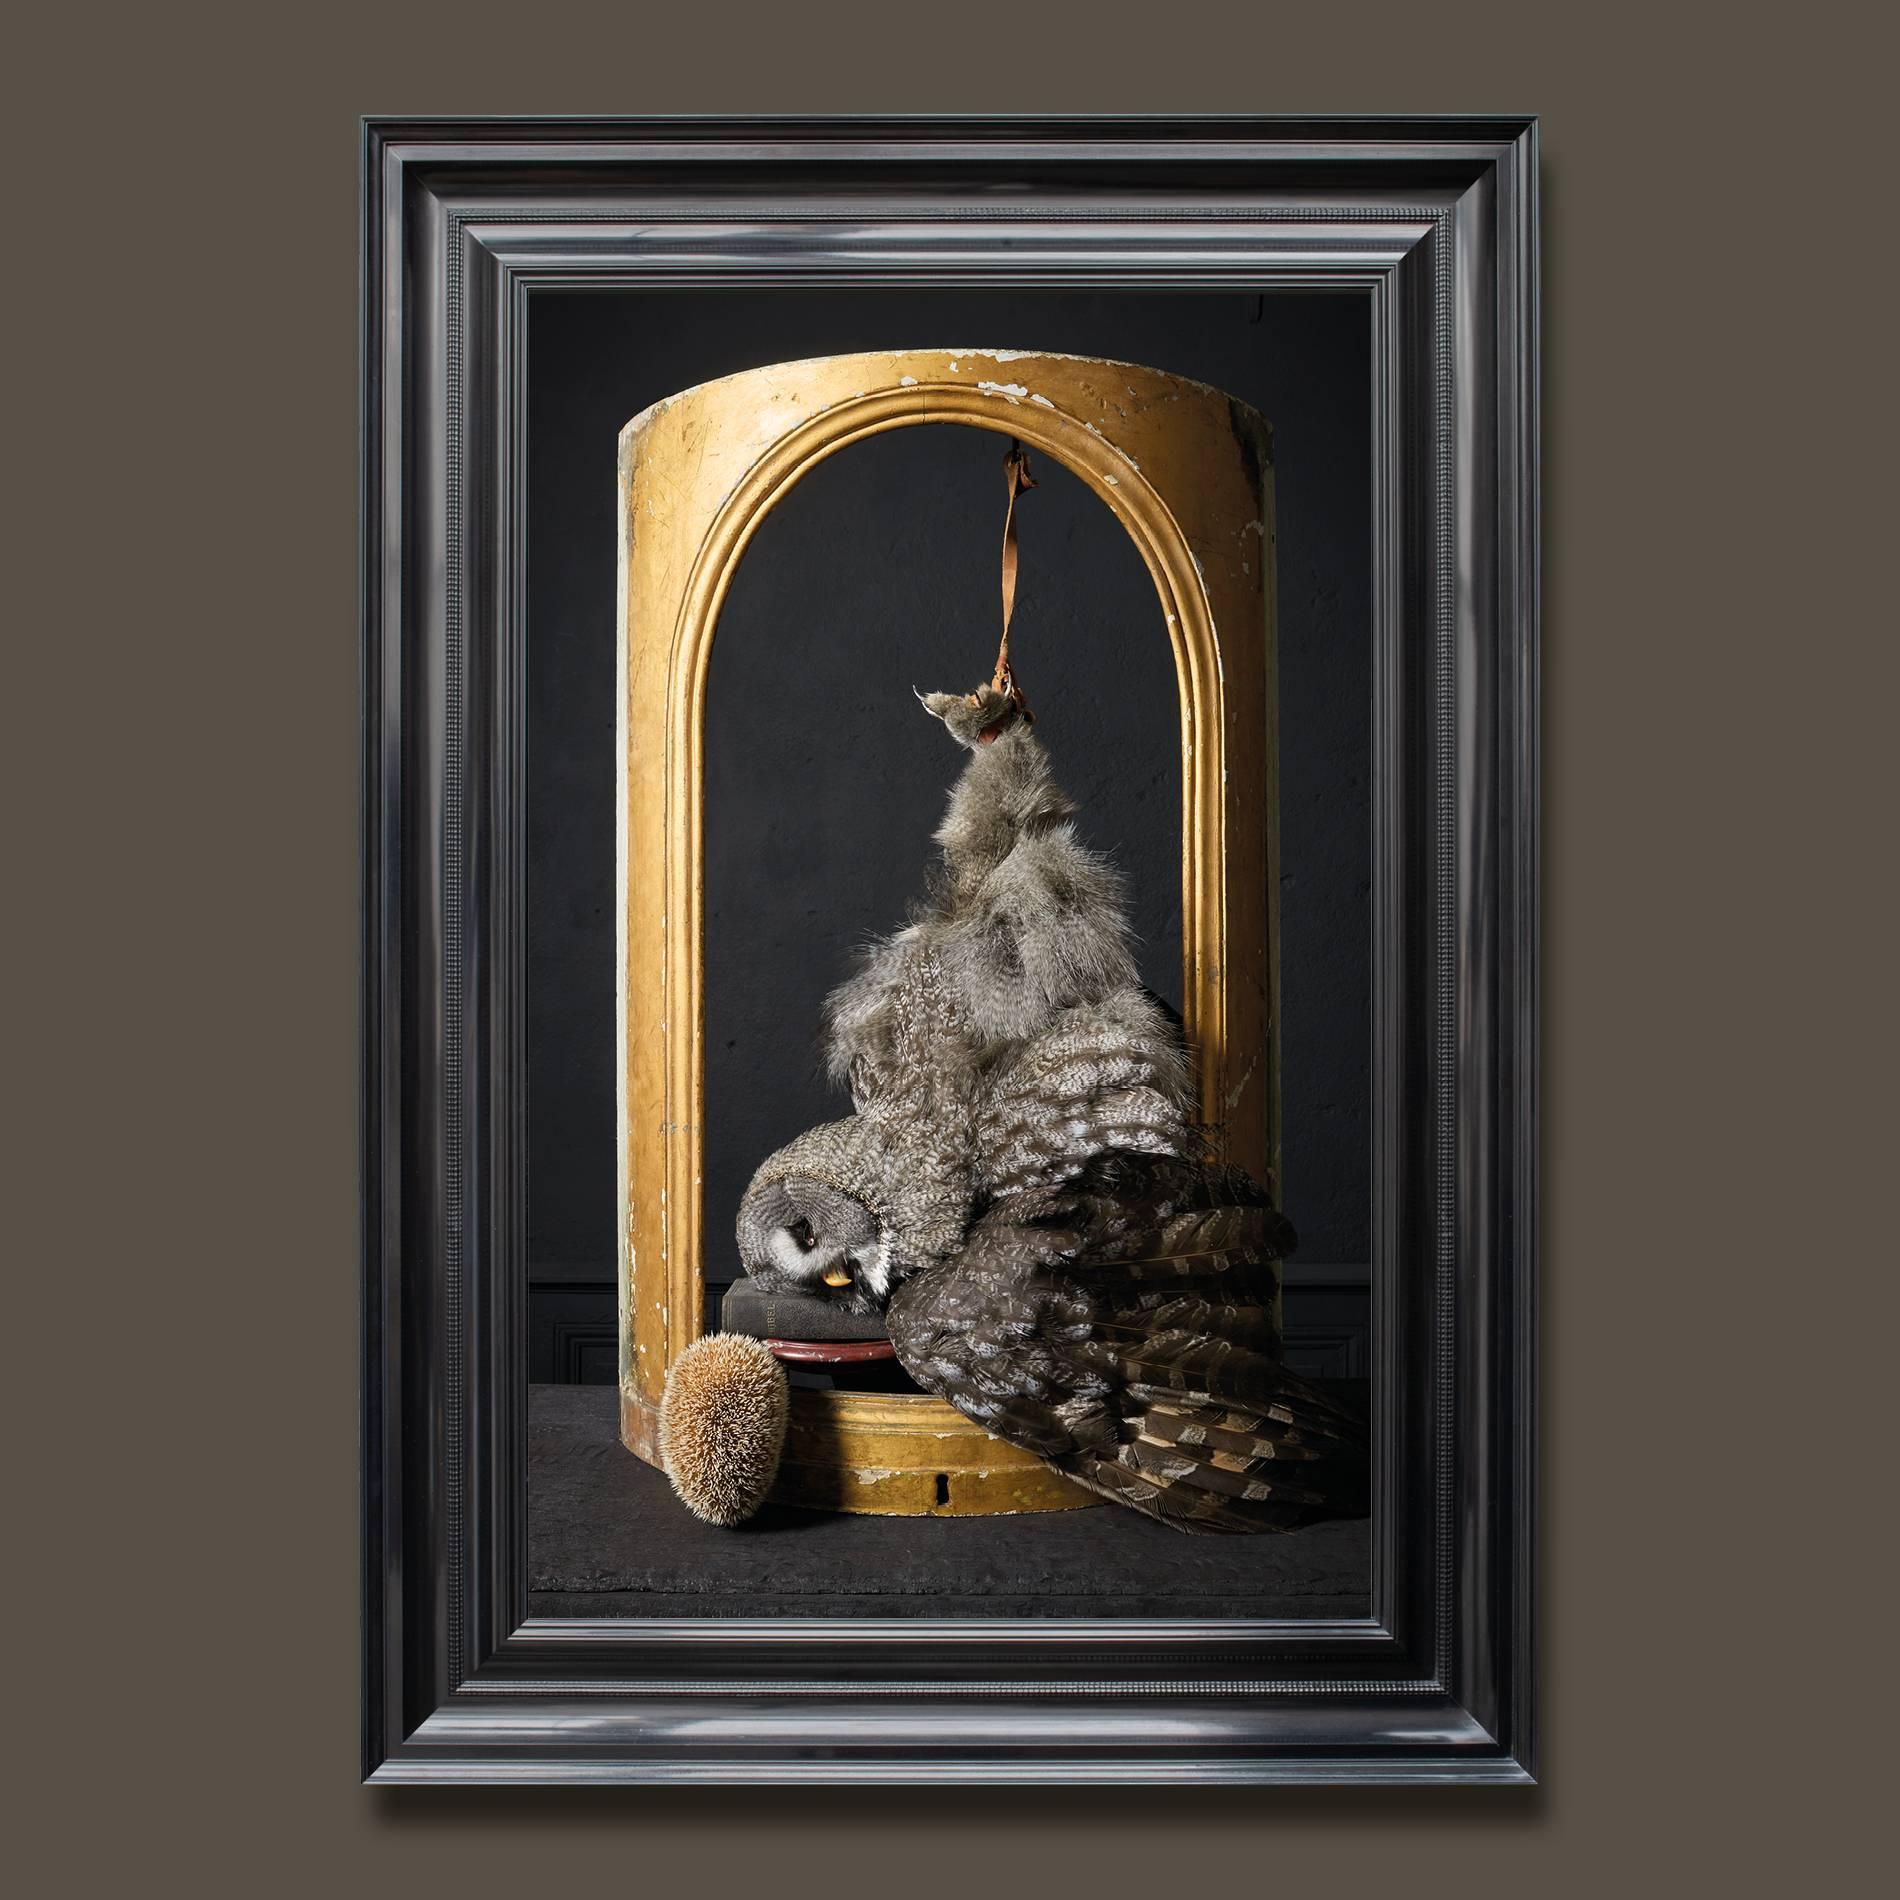 The third series of photographs by fine Taxidermists Sinke & Van Tongeren

After observing and analysing so many 17th-century paintings, they were inspired to create a new series of work focused on still life masterpieces. They chose photography as